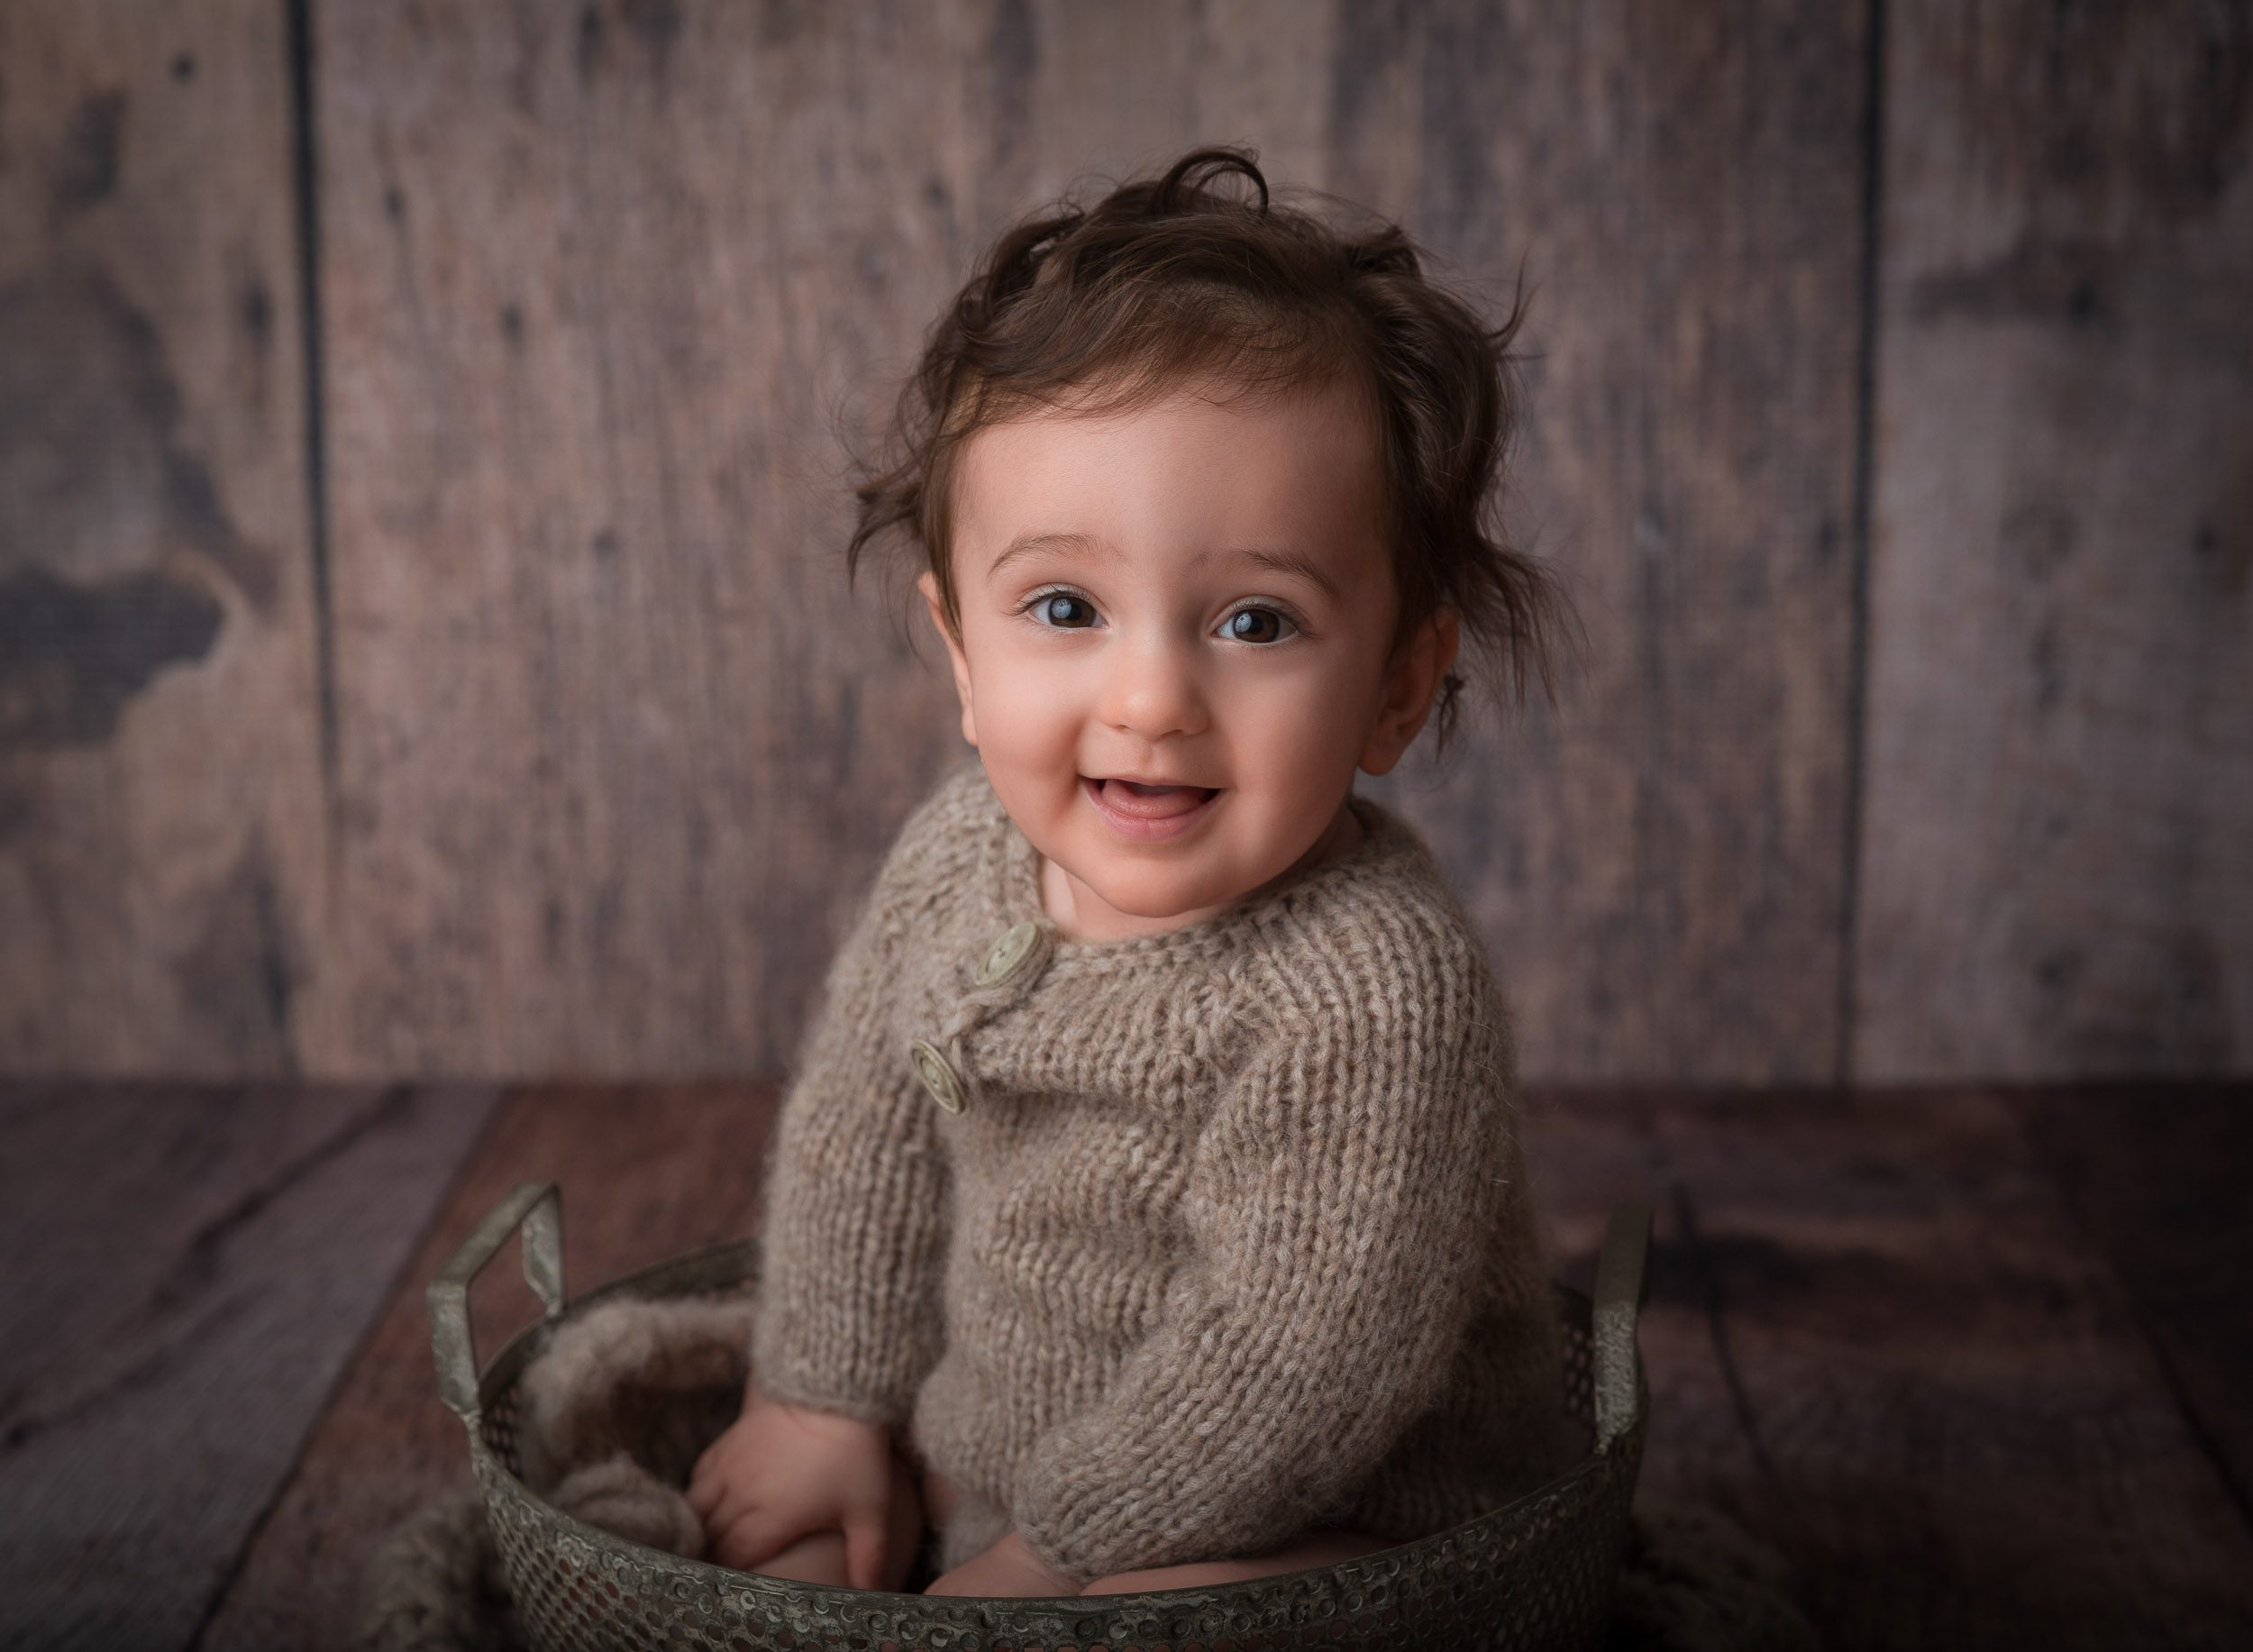 wild haired baby boy in knit outfit smiling